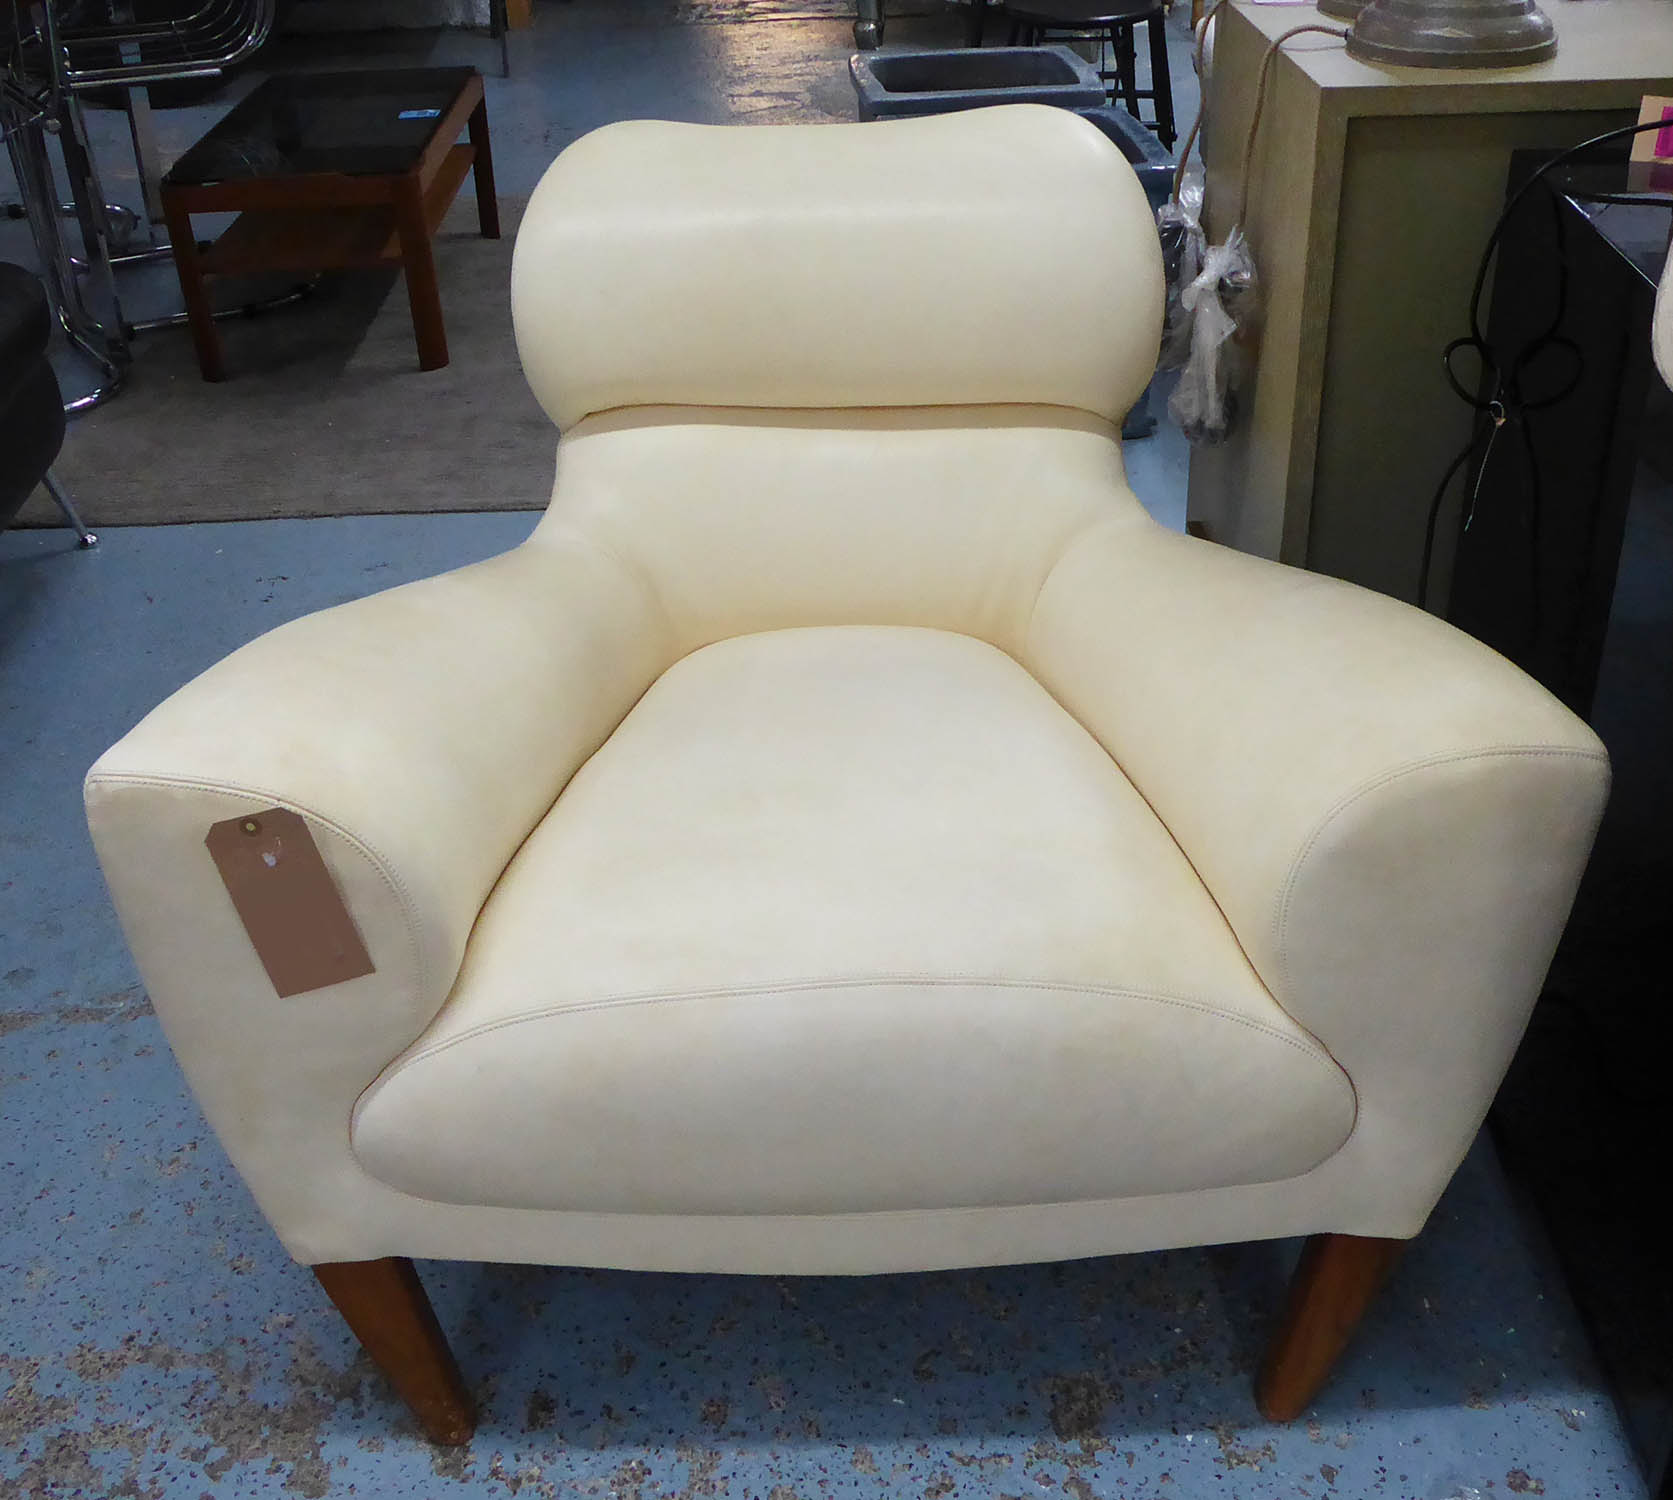 LINLEY ASTON CHAIR BY DAVID LINLEY, 74cm H. (slight faults) - Image 4 of 13